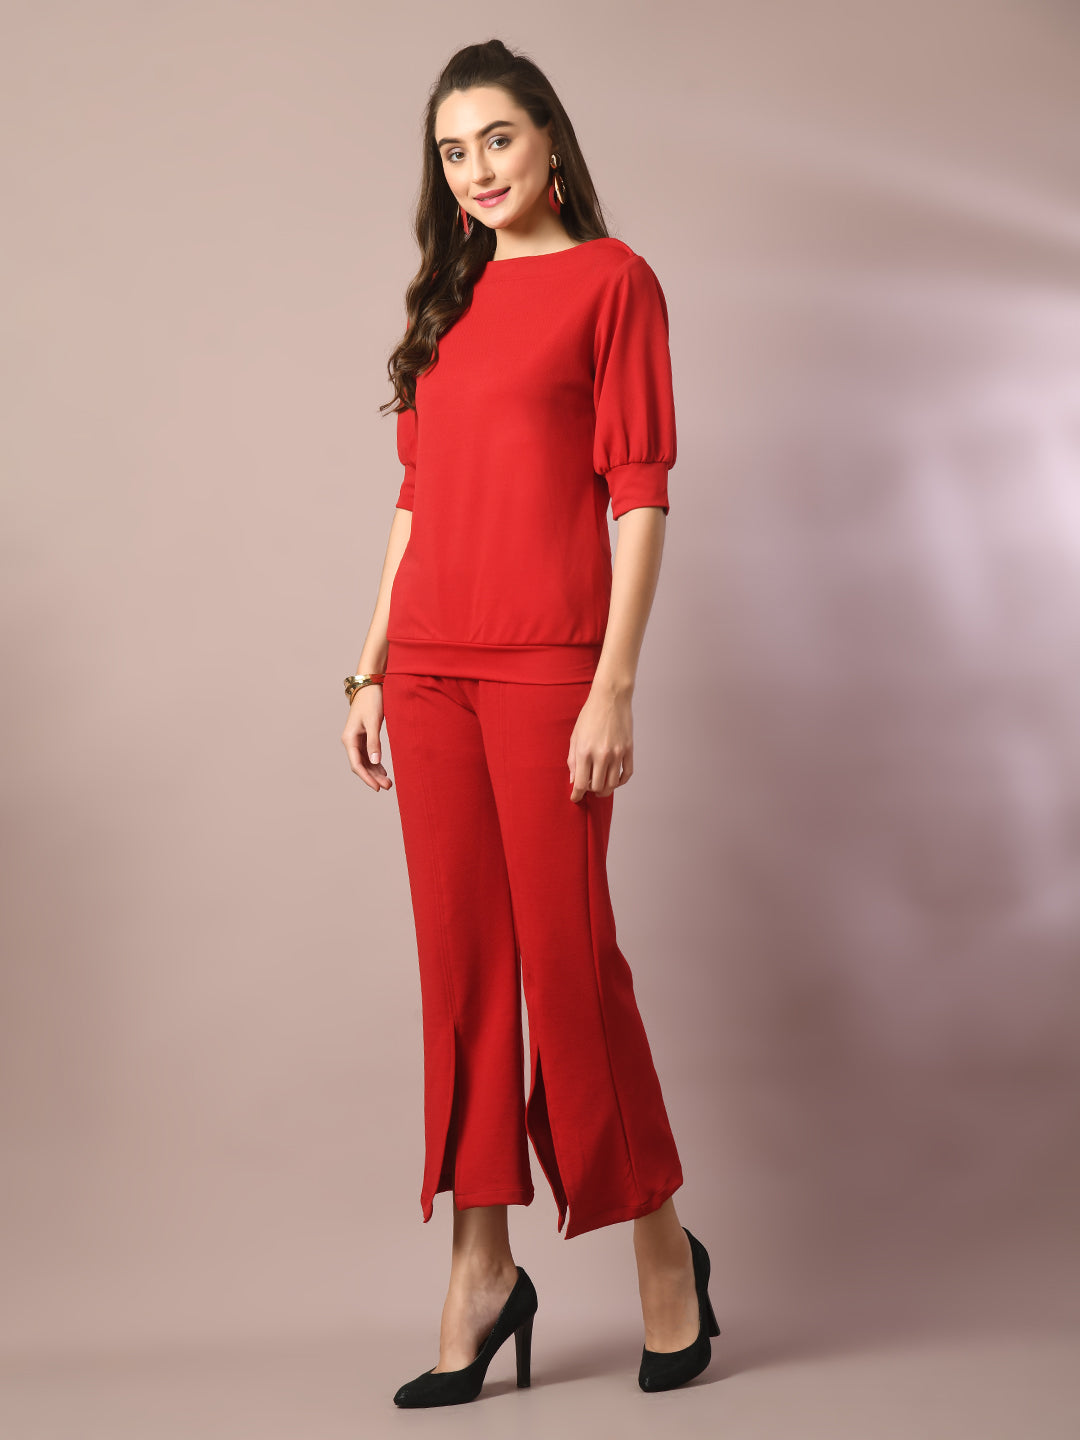 Women's  Red Solid Boat Neck Party Top  - Myshka